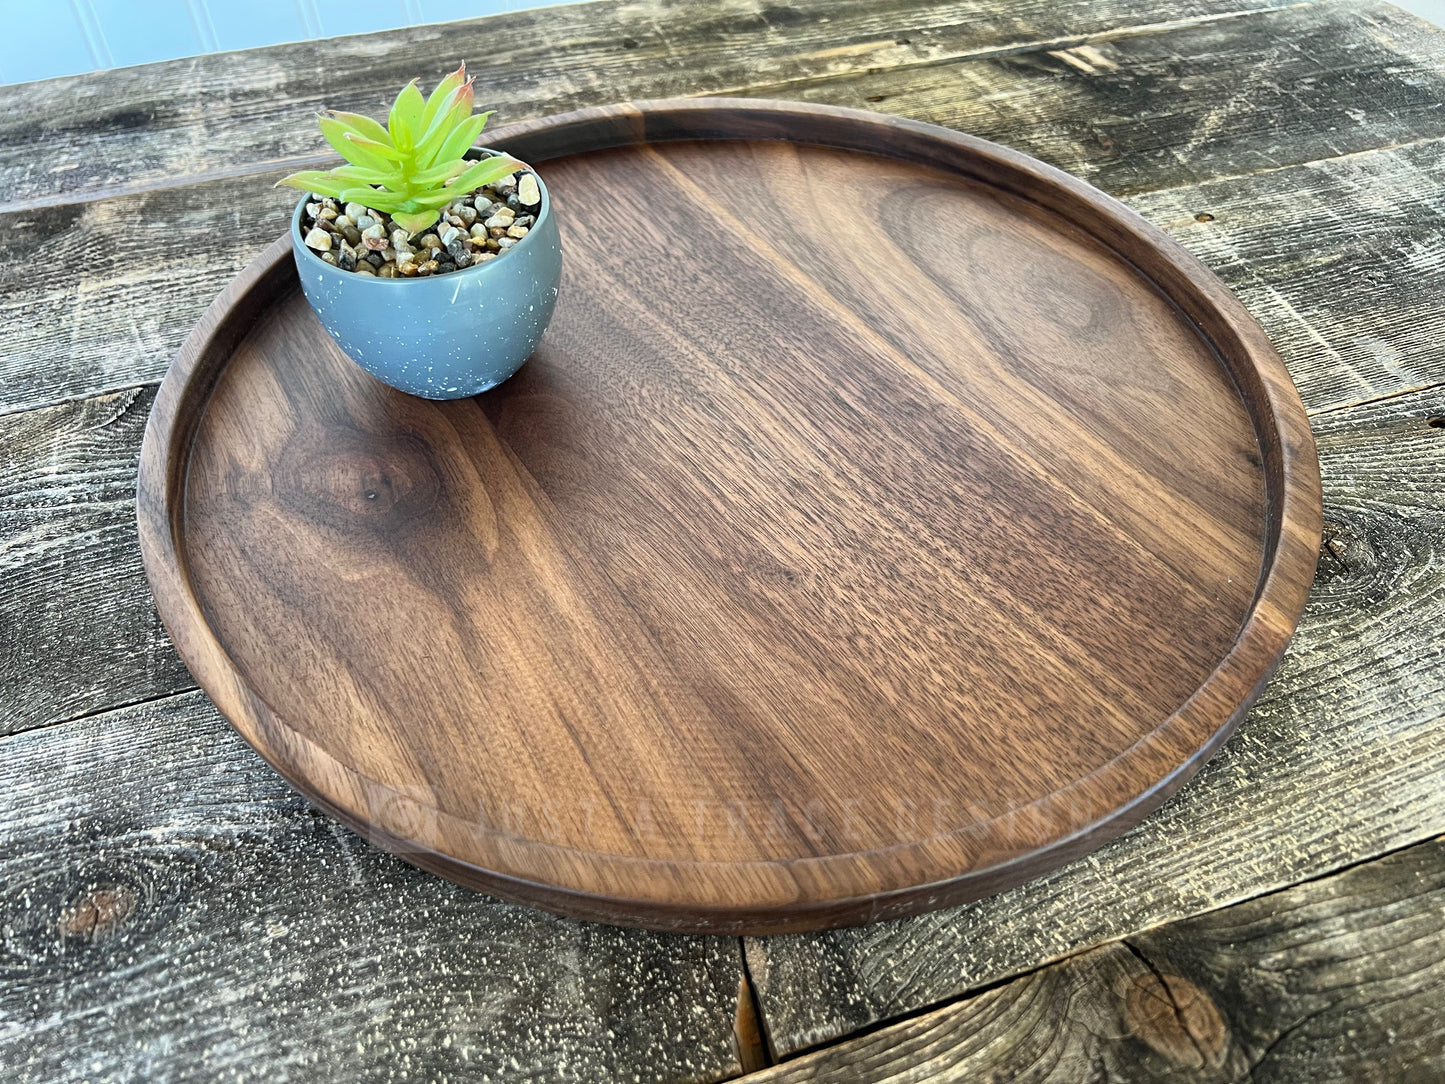 12" Round Walnut Tray, Grazing Board, Charcuterie Tray, Coffee Table Tray, Ottoman Tray, Wood Platter, Serving Tray, Serving Dish